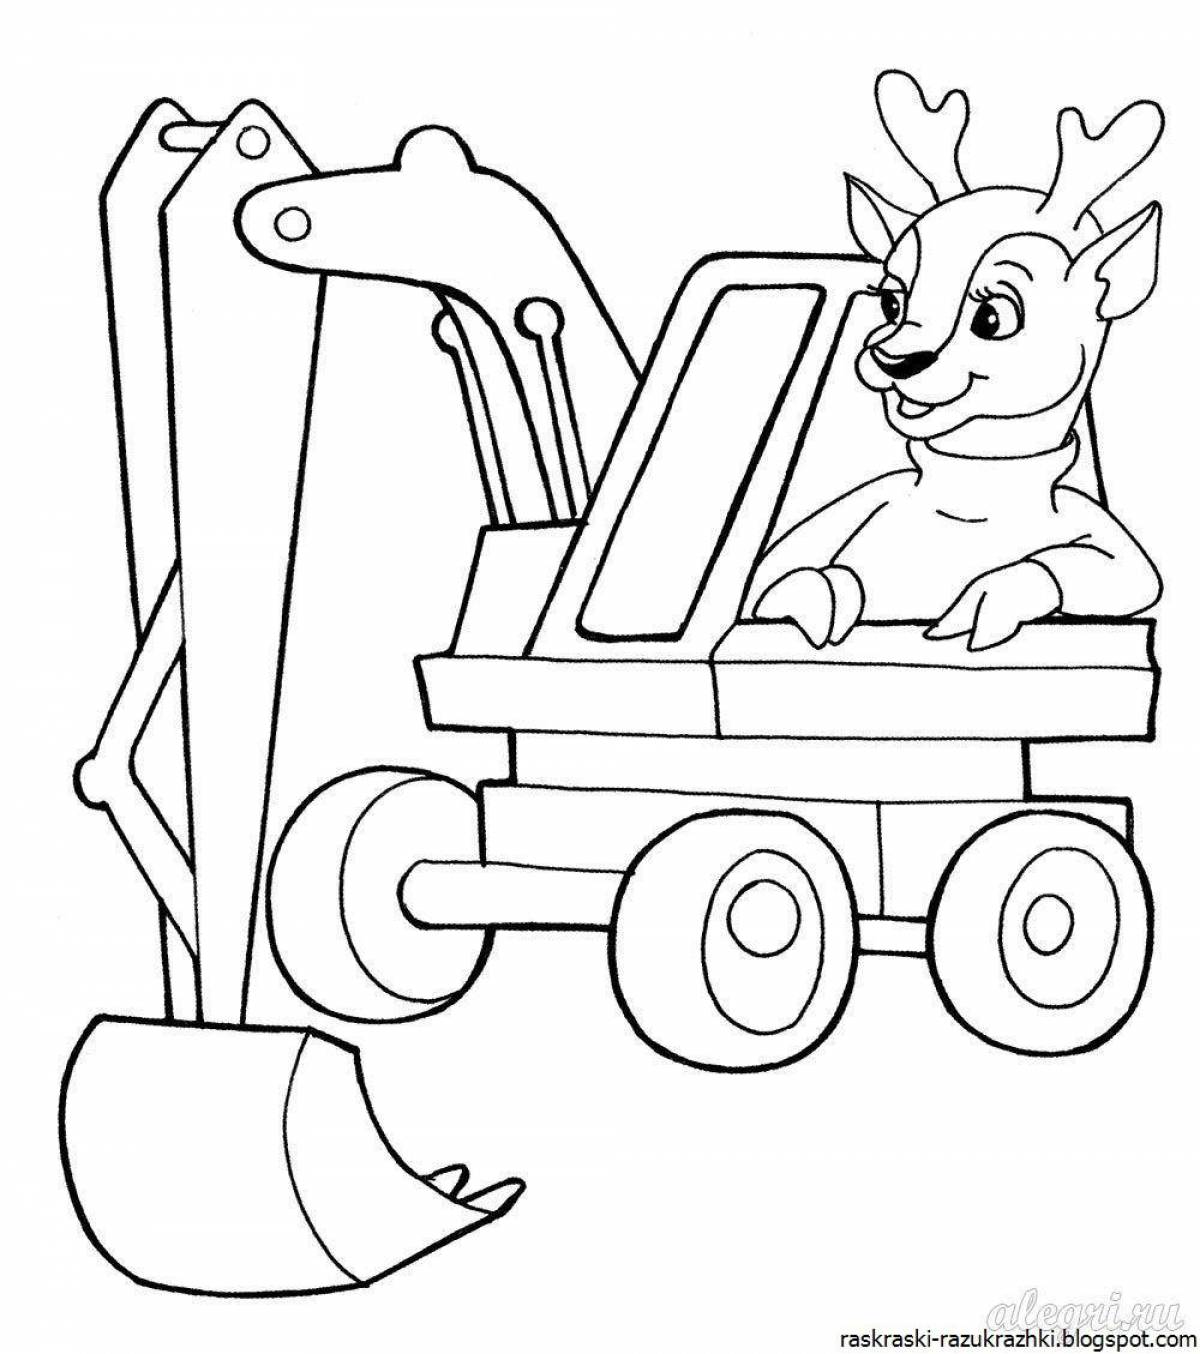 Gorgeous excavator coloring book for kids